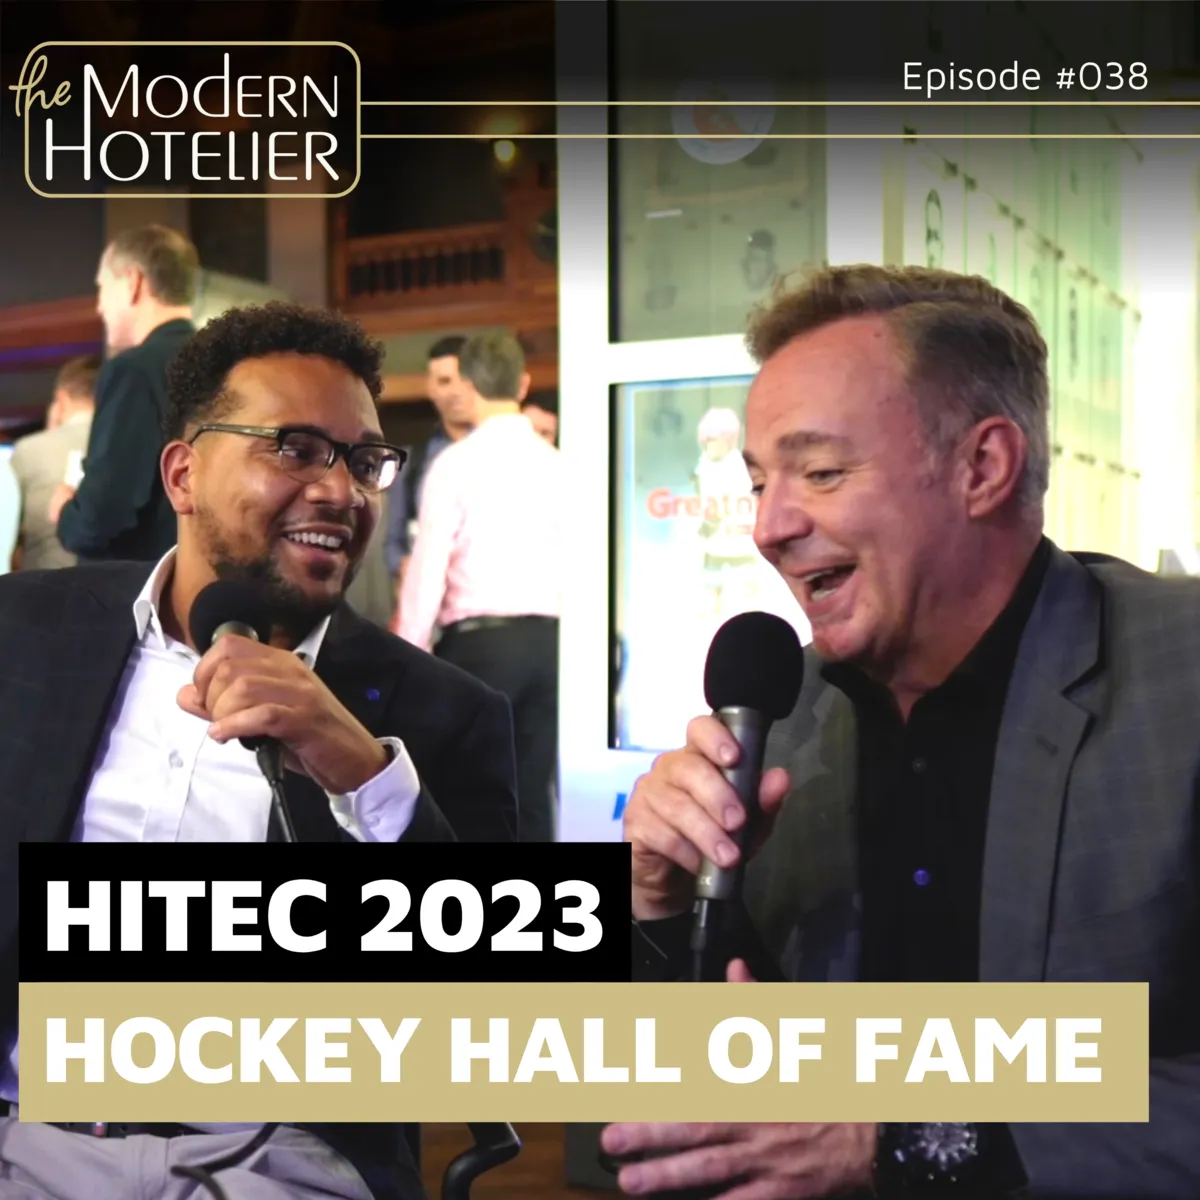 HITEC 2023: From the Hockey Hall of Fame